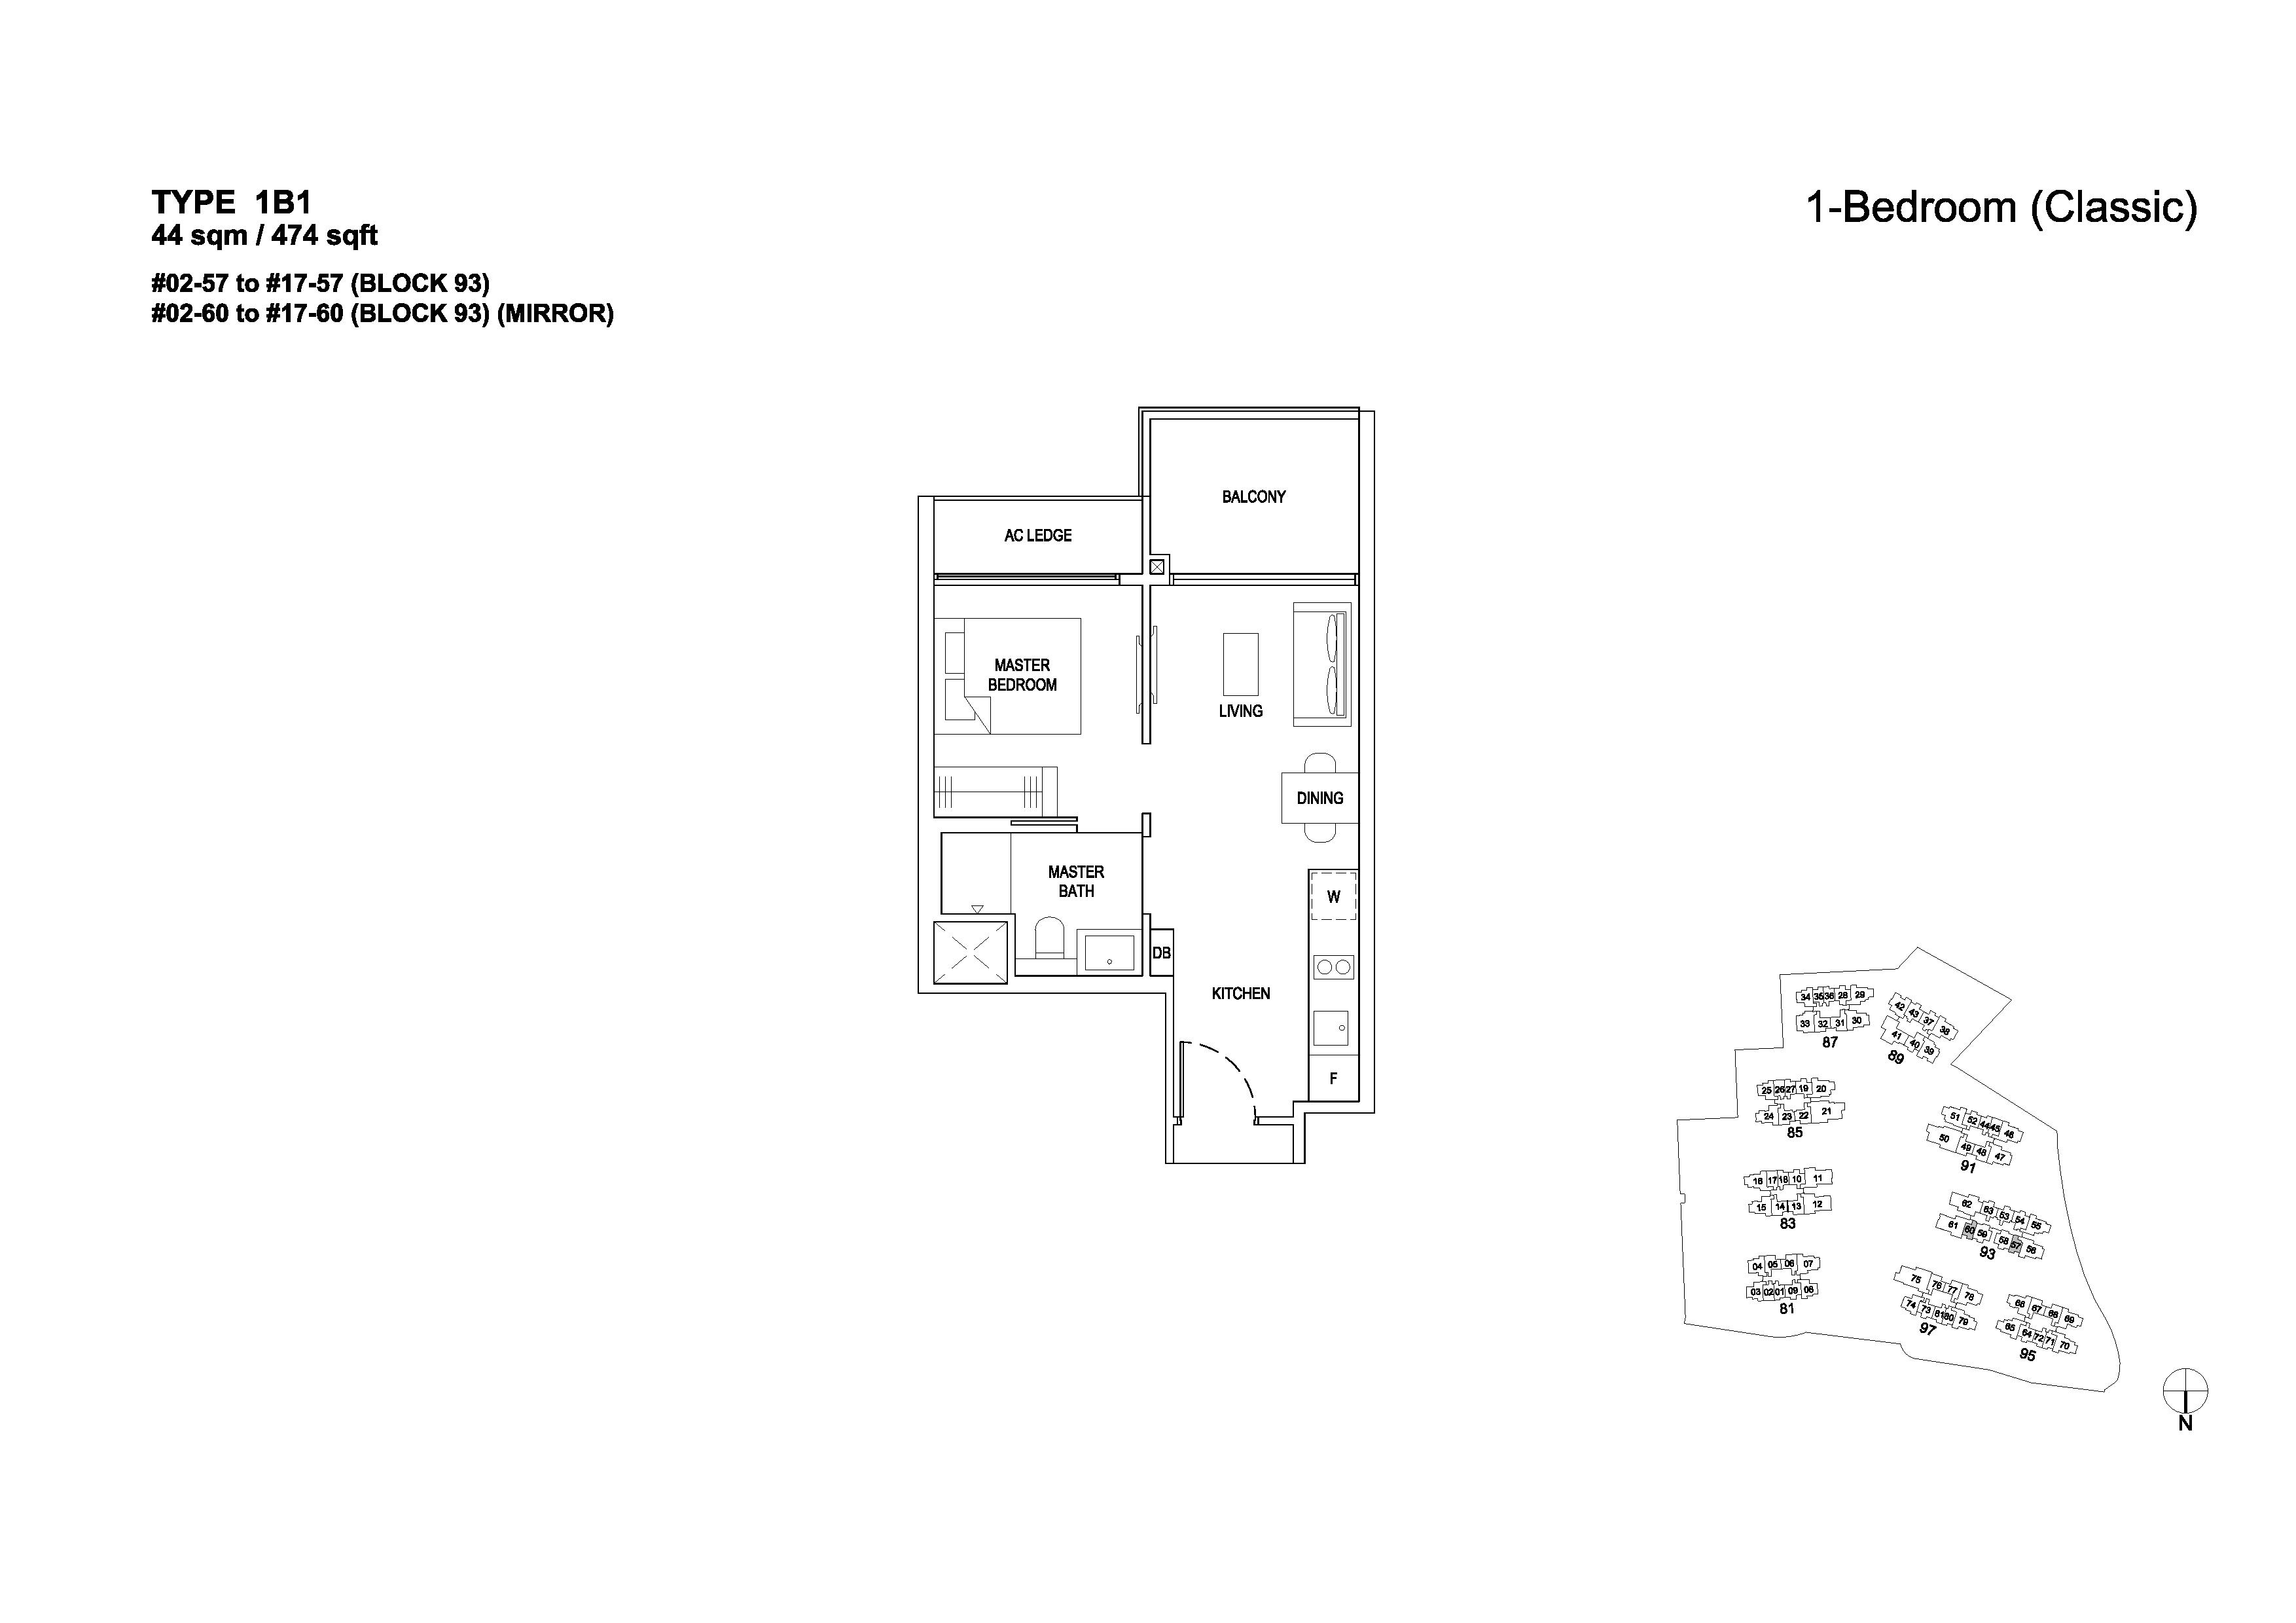 The Florence Residences 1 Bedroom Classic Type 1B1 Floor Plans